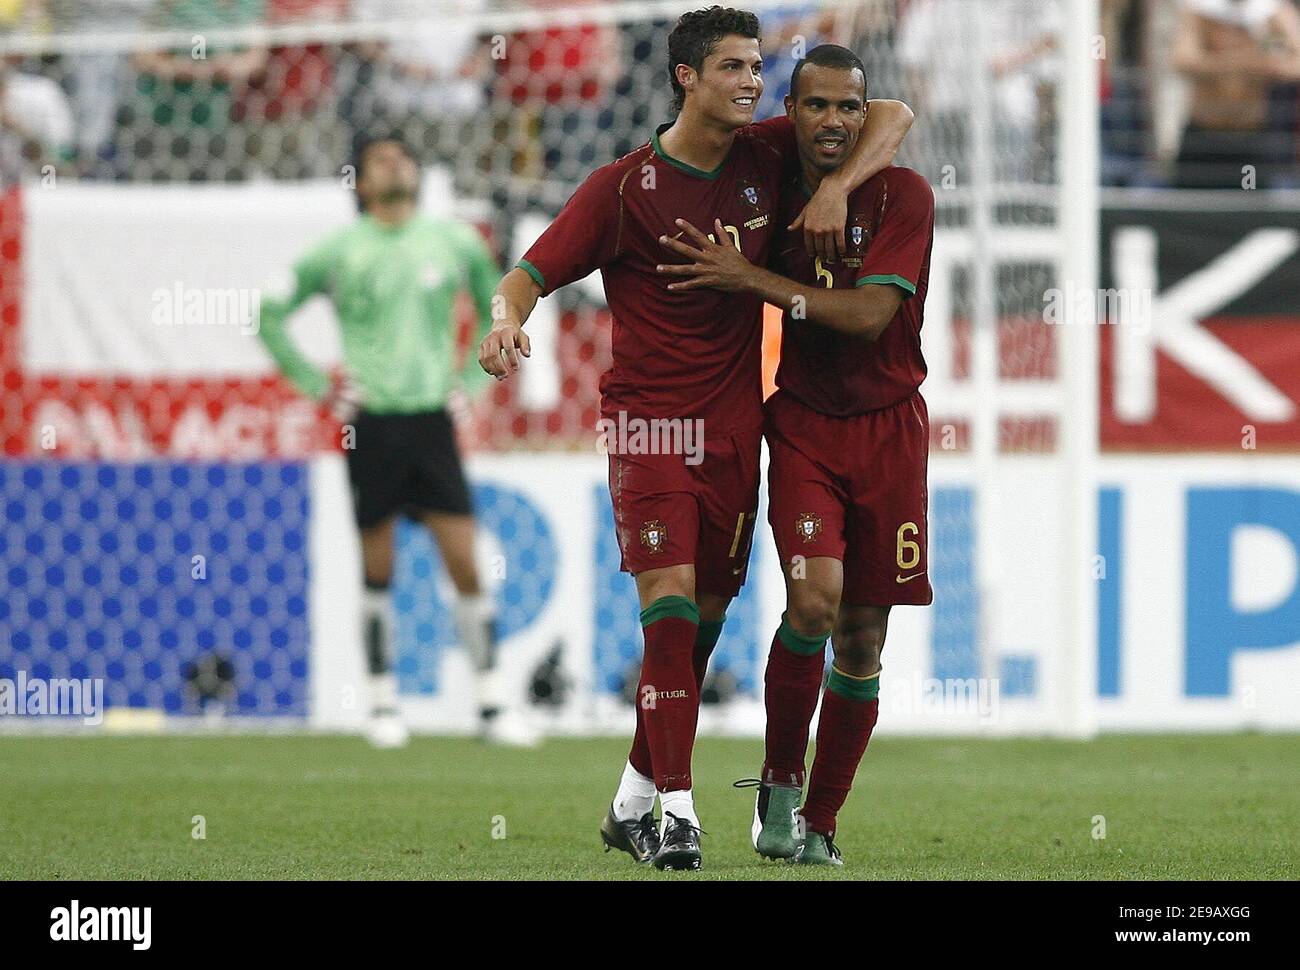 Portugal's Cristiano Ronaldo and Costinha celebrate during the World Cup 2006, Portugal vs Iran at the Fifa World Cup Stadium in Frankfurt, Germany on June 17, 2006. Portugal won 2-0. Photo by Christian Liewig/ABACAPRESS.COM Stock Photo